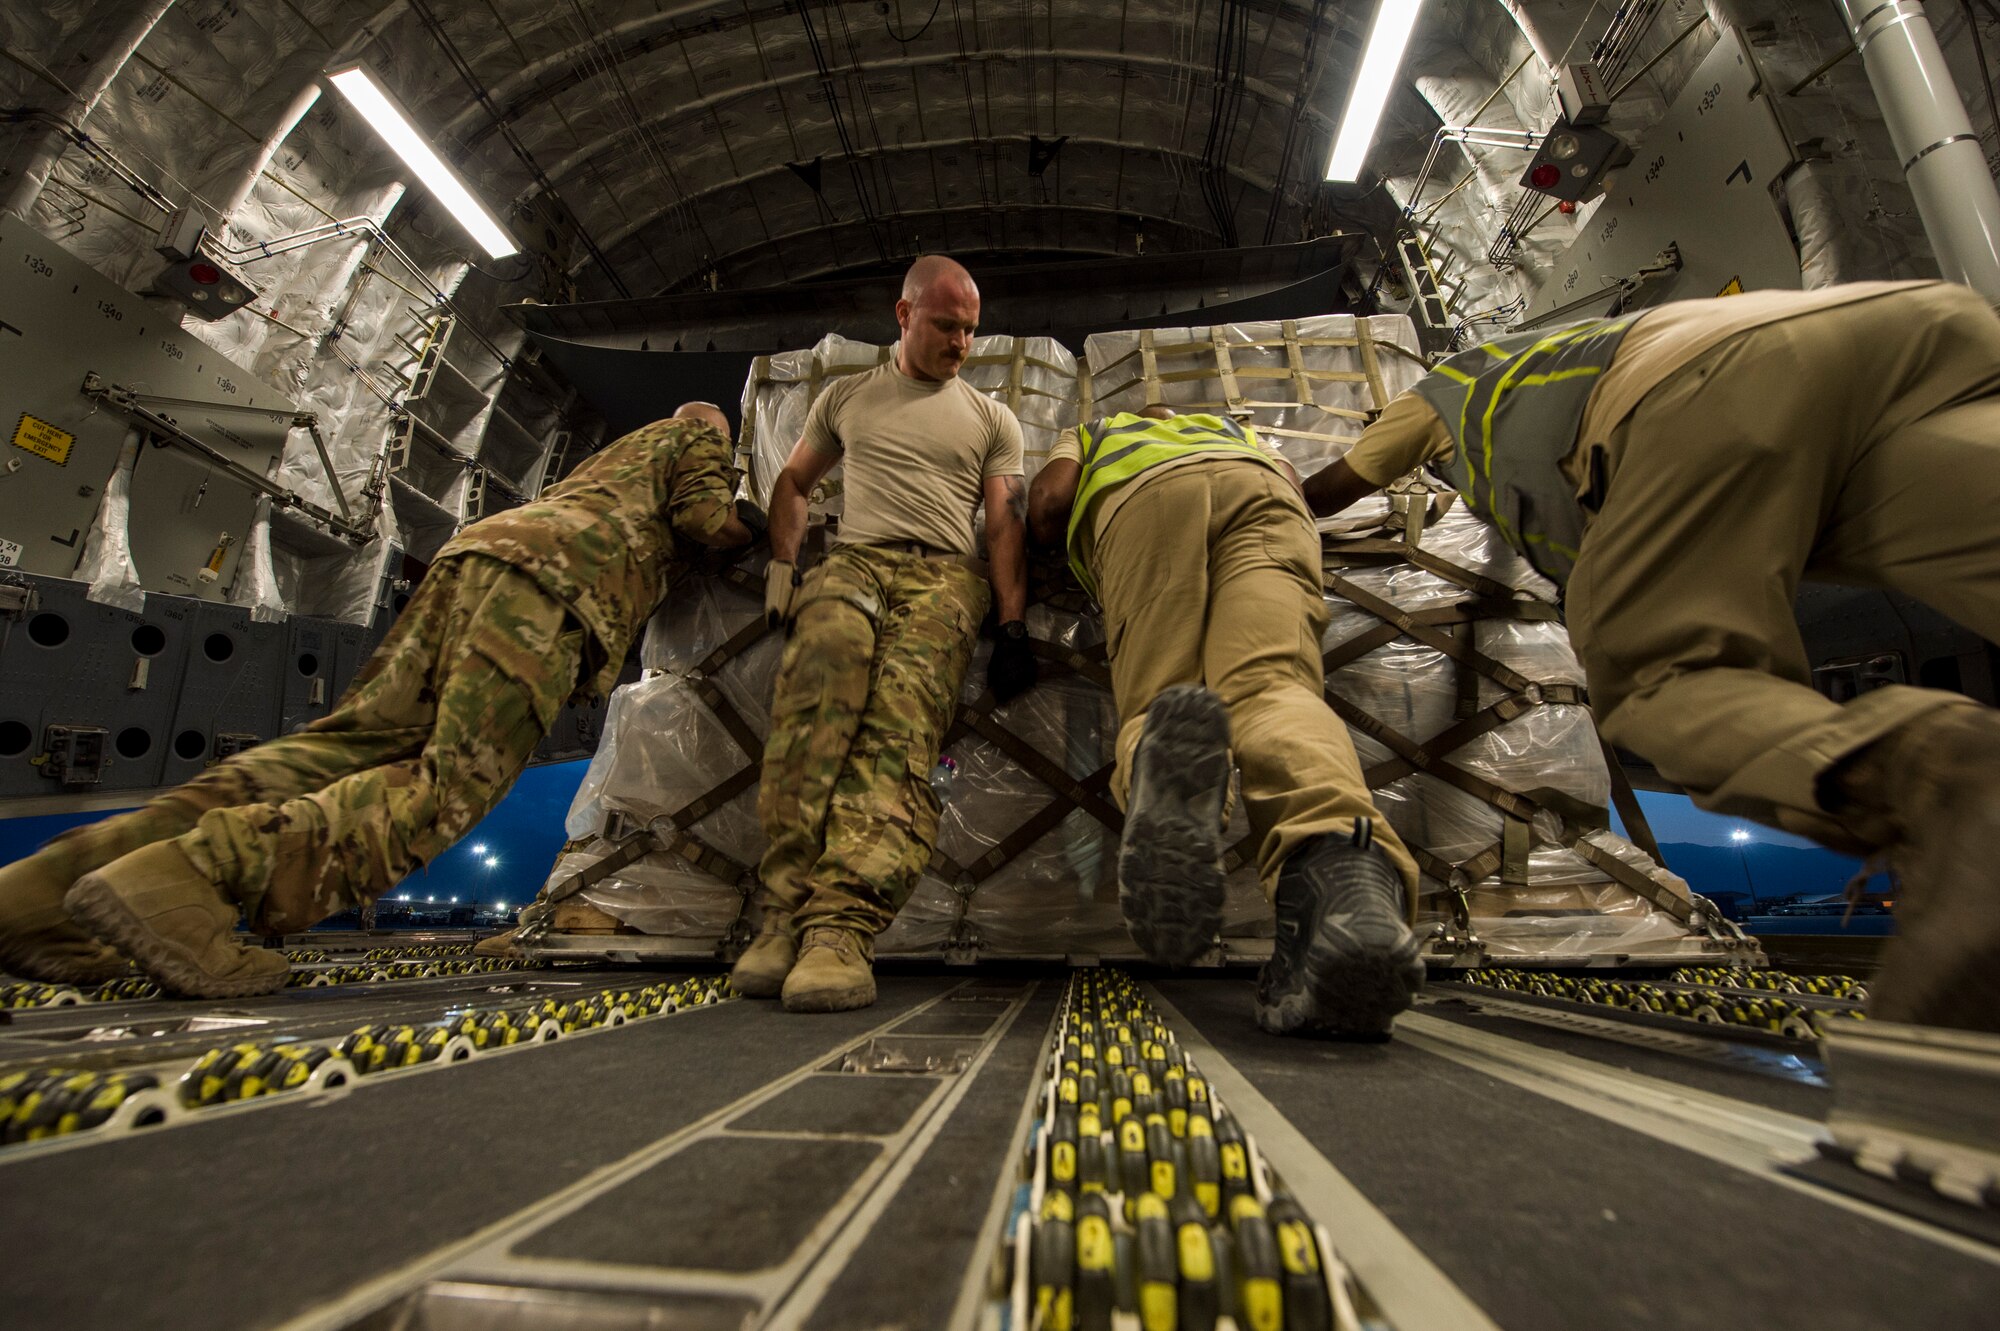 U.S. Air Force loadmasters assigned to the 816th Expeditionary Airlift Squadron and air transportation personnel off load pallets from a C-17 Globemaster III at Bagram Airfield, Afghanistan, May 10, 2018. The C-17 transported troops and cargo to forward operating locations throughout the U.S. Central Command area of responsibility in support of Operation Freedom Sentinel mission. The C-17 is not only proficient in transporting troops and supplies, but can also perform tactical airlift and airdrop missions and transport ambulatory patients during aeromedical evacuations. (U.S. Air Force photo by Staff Sgt. Keith James)